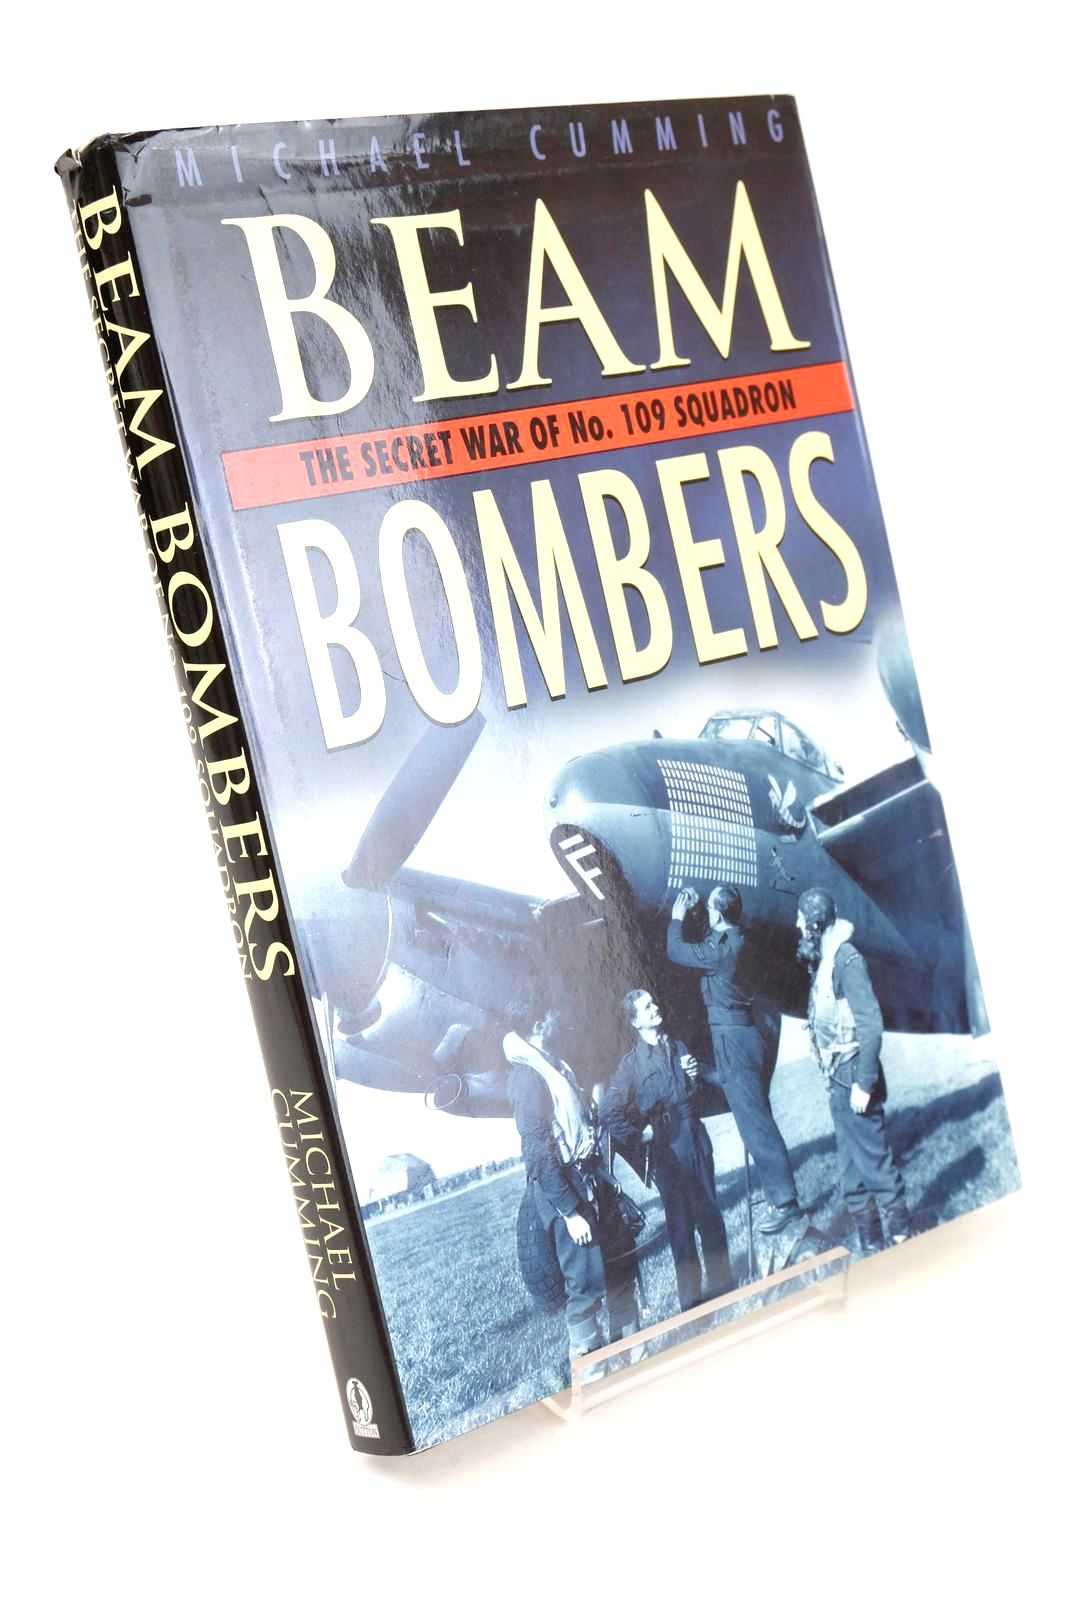 Photo of BEAM BOMBERS THE SECRET WAR OF No. 109 SQUADRON written by Cumming, Michael published by Sutton Publishing (STOCK CODE: 1325385)  for sale by Stella & Rose's Books